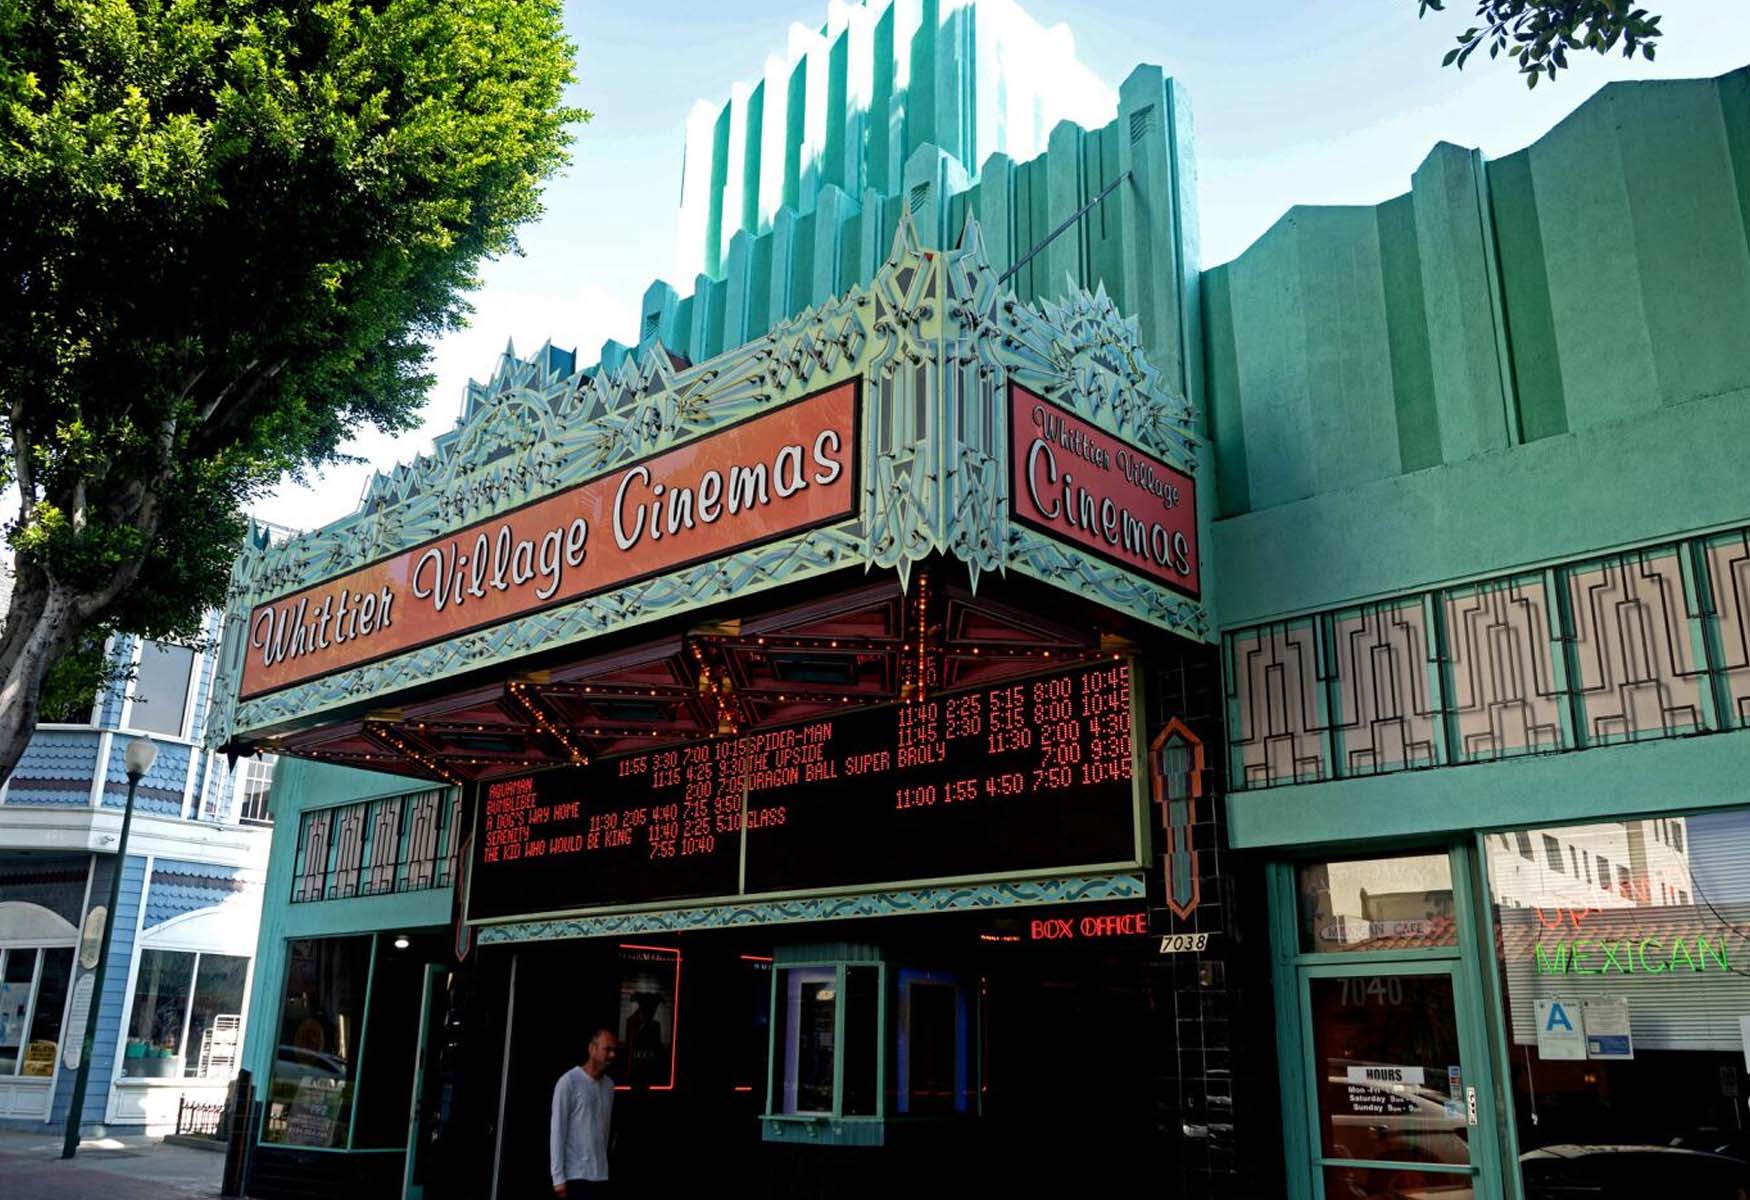 11-facts-about-entertainment-industry-in-whittier-california